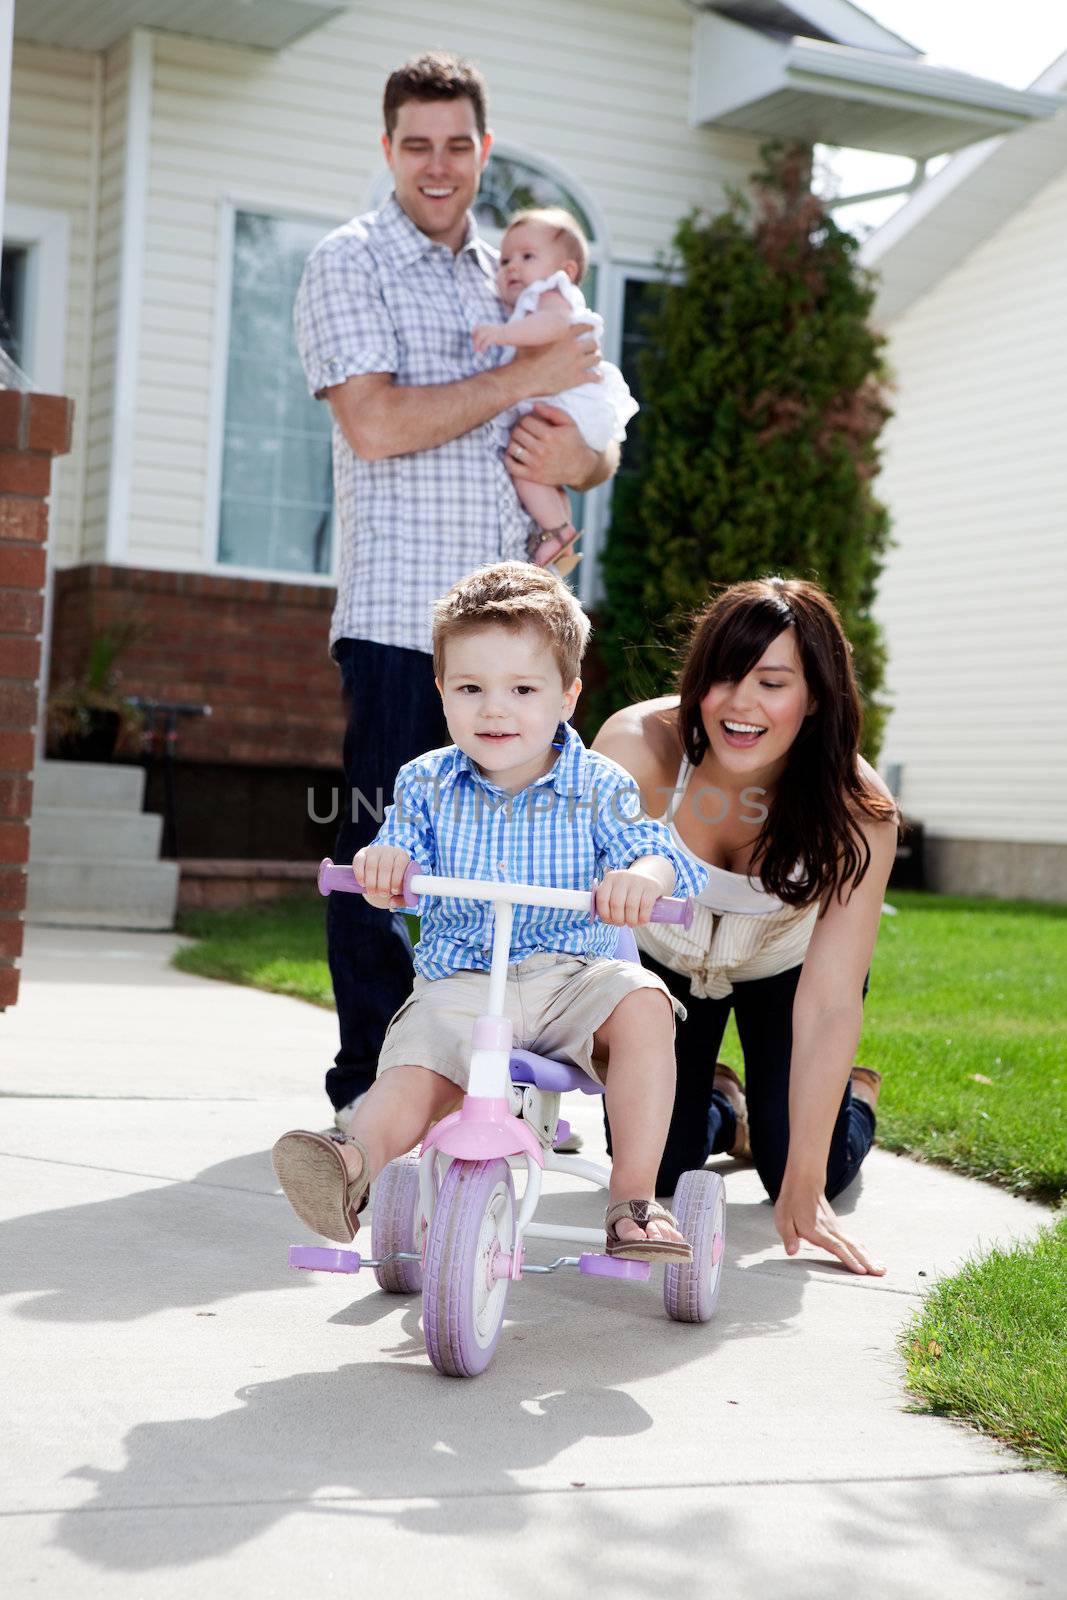 Young happy boy riding tricycle with family watching